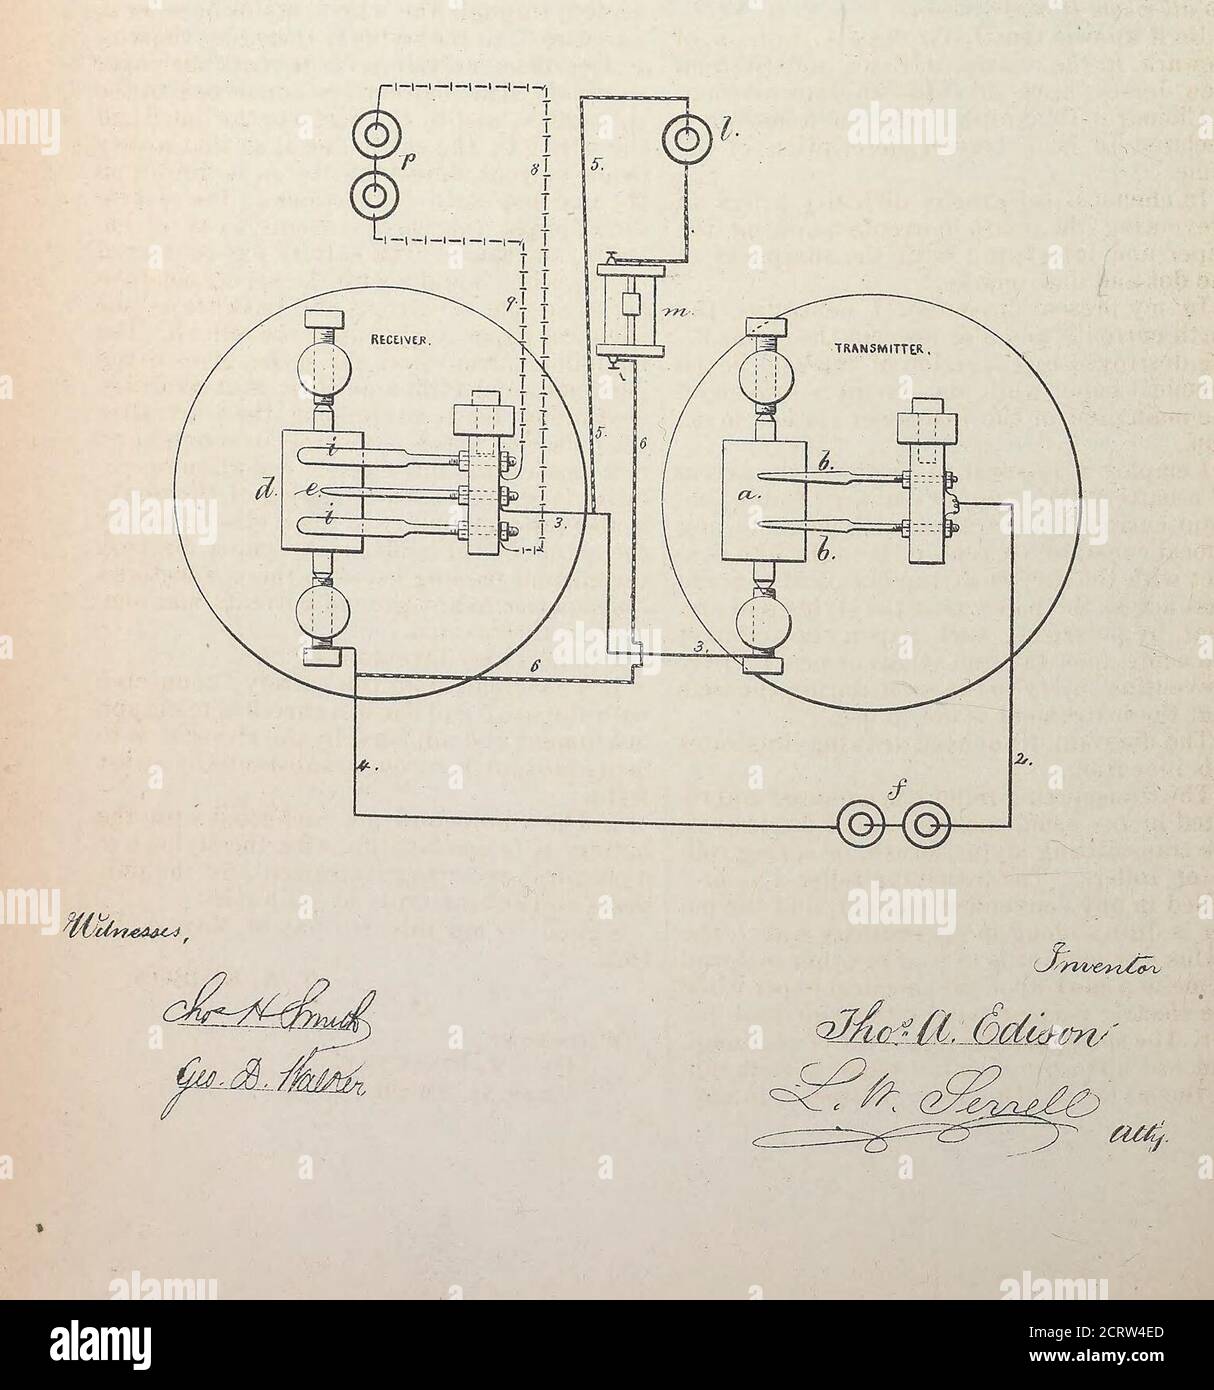 . Collection of United States patents granted to Thomas A. Edison, 1869-1884 . to the type-wheel magnets, as be-fore. §66 The printing lever and magnet are notshown in the drawing, but they may be ofusual character, either for the transmitter orreceiver, and be operated in any desired man-ner to effect the printing when the type-wheelsare stopped. I claim as my invention— 1. The stop-arm s, connected with the leverI and pallets 8, in combination with the pul-sator g, and stop /for arresting the movementof the pulsator, substantially as set forth. 2. The type-wheel magnet h, in the circuitthat Stock Photo